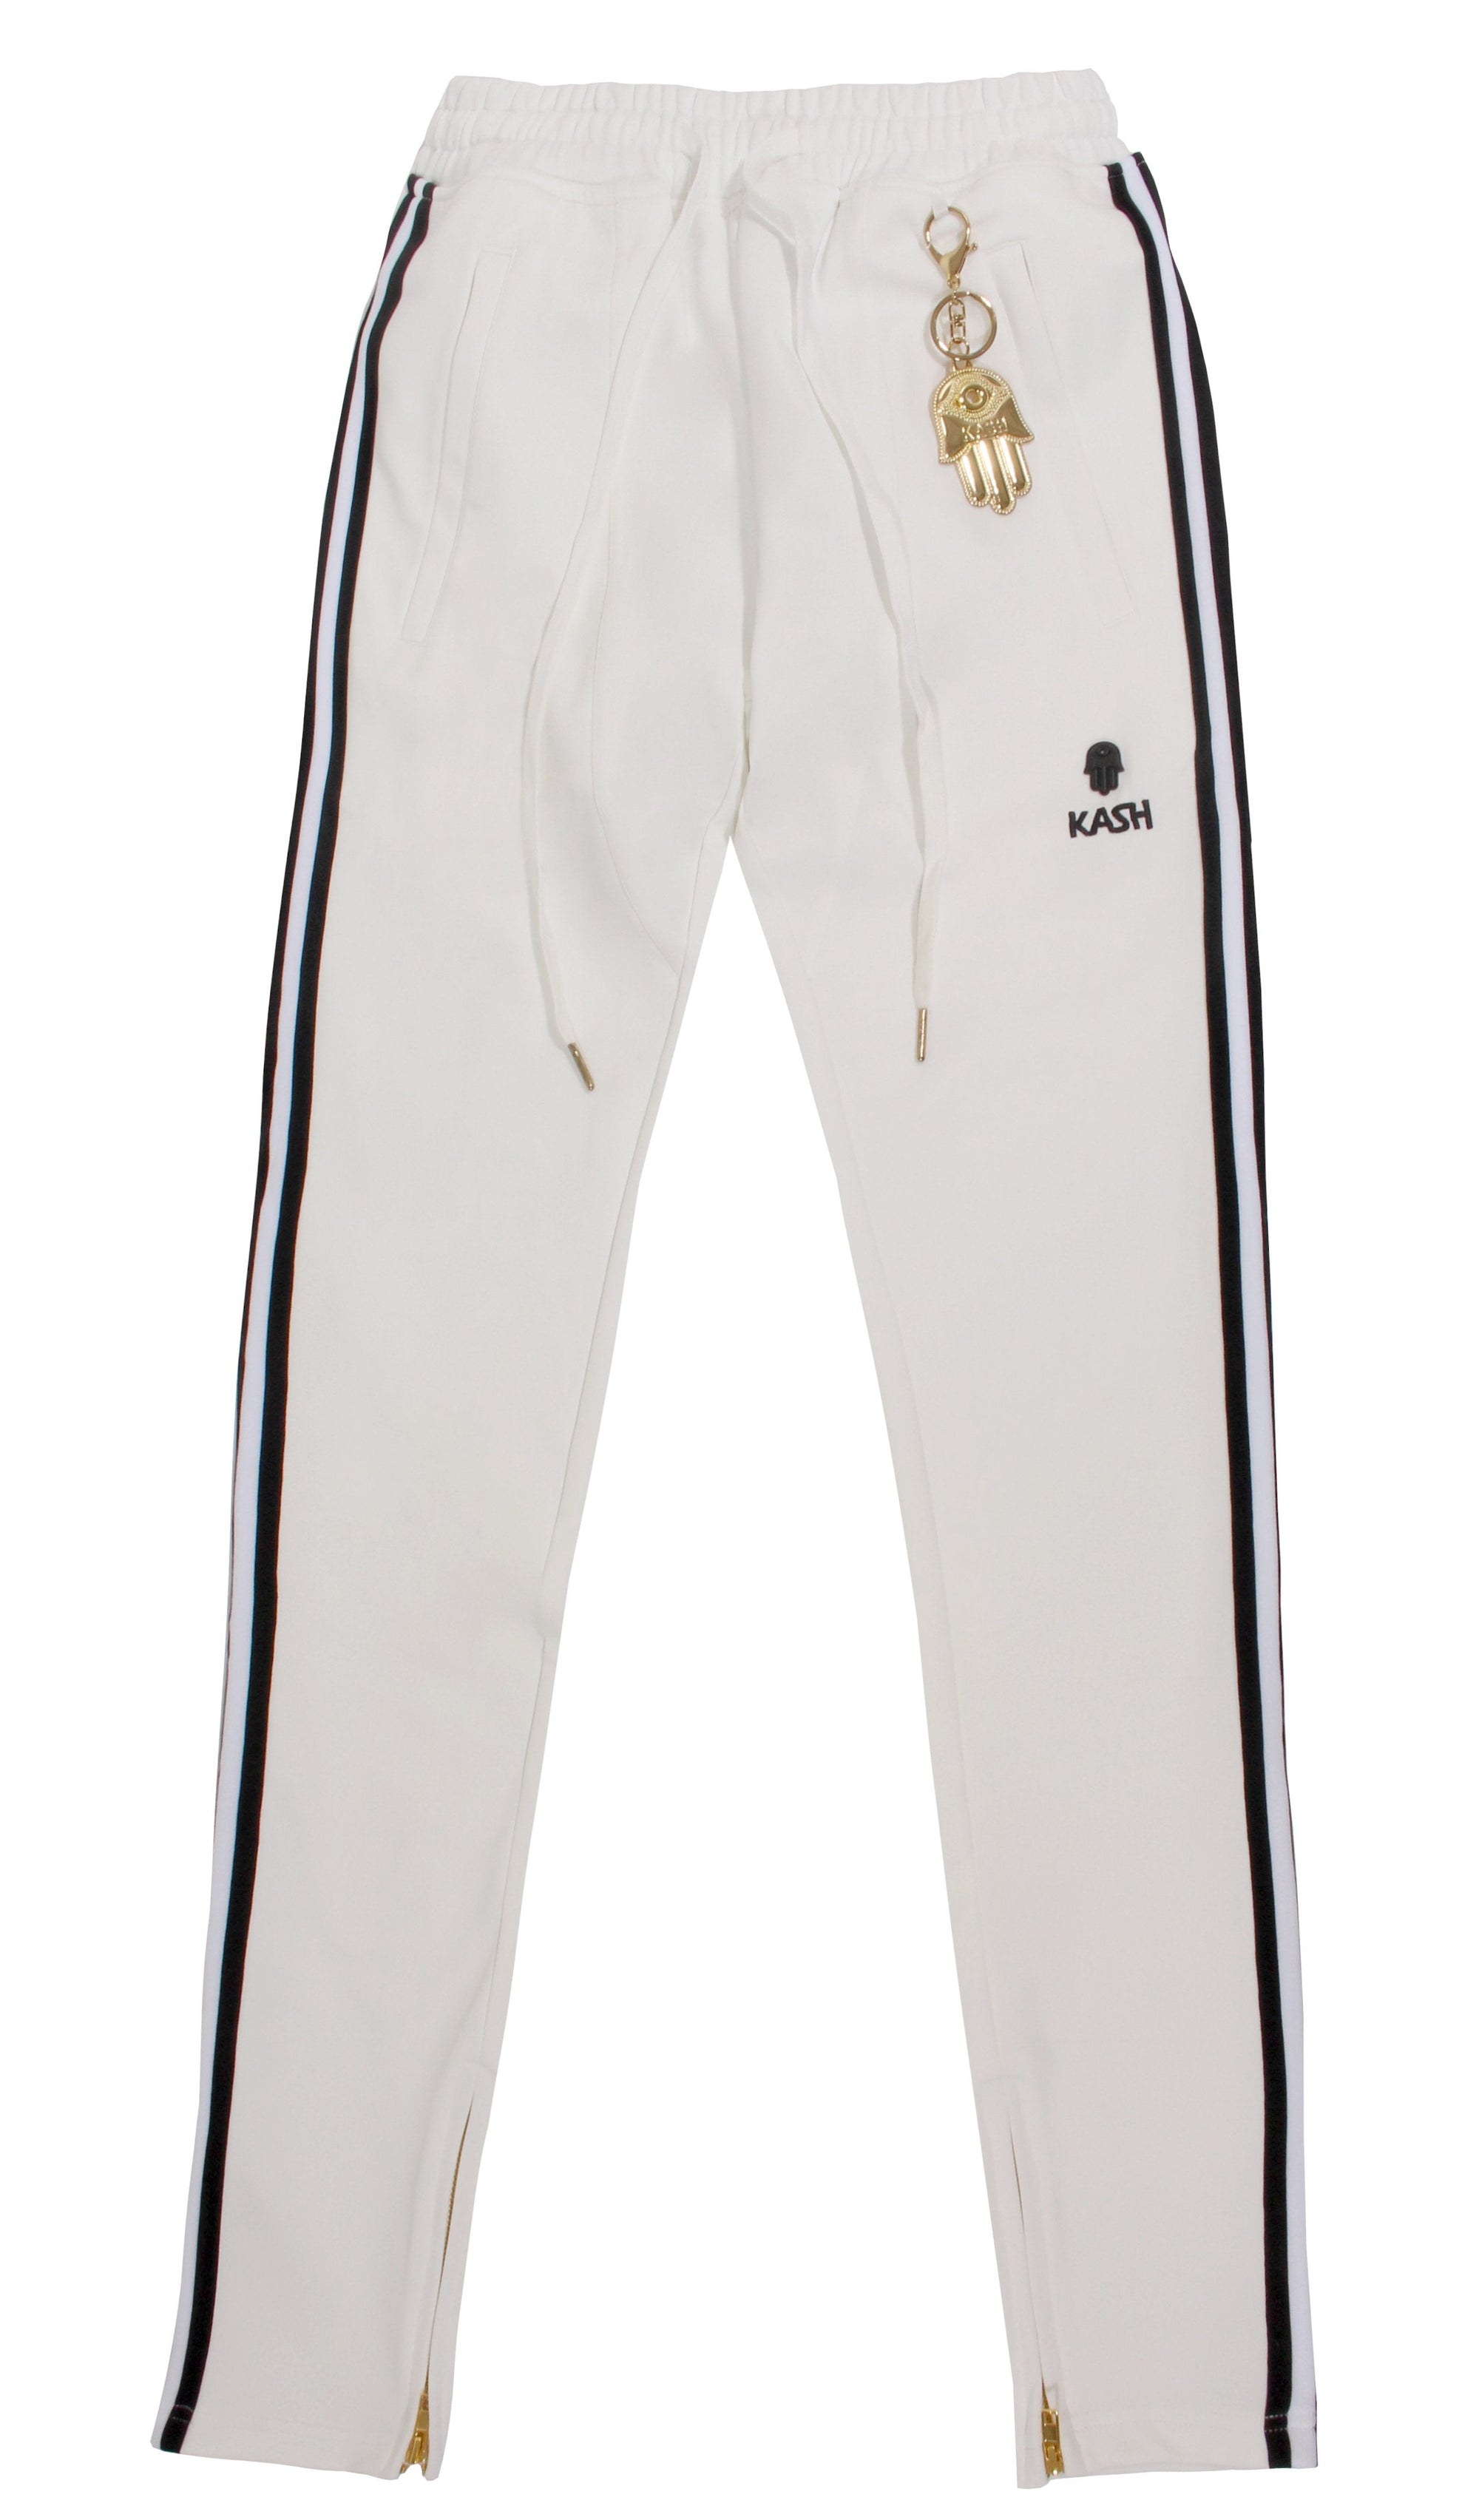 Kash Track Pant W/ Embroidery - White